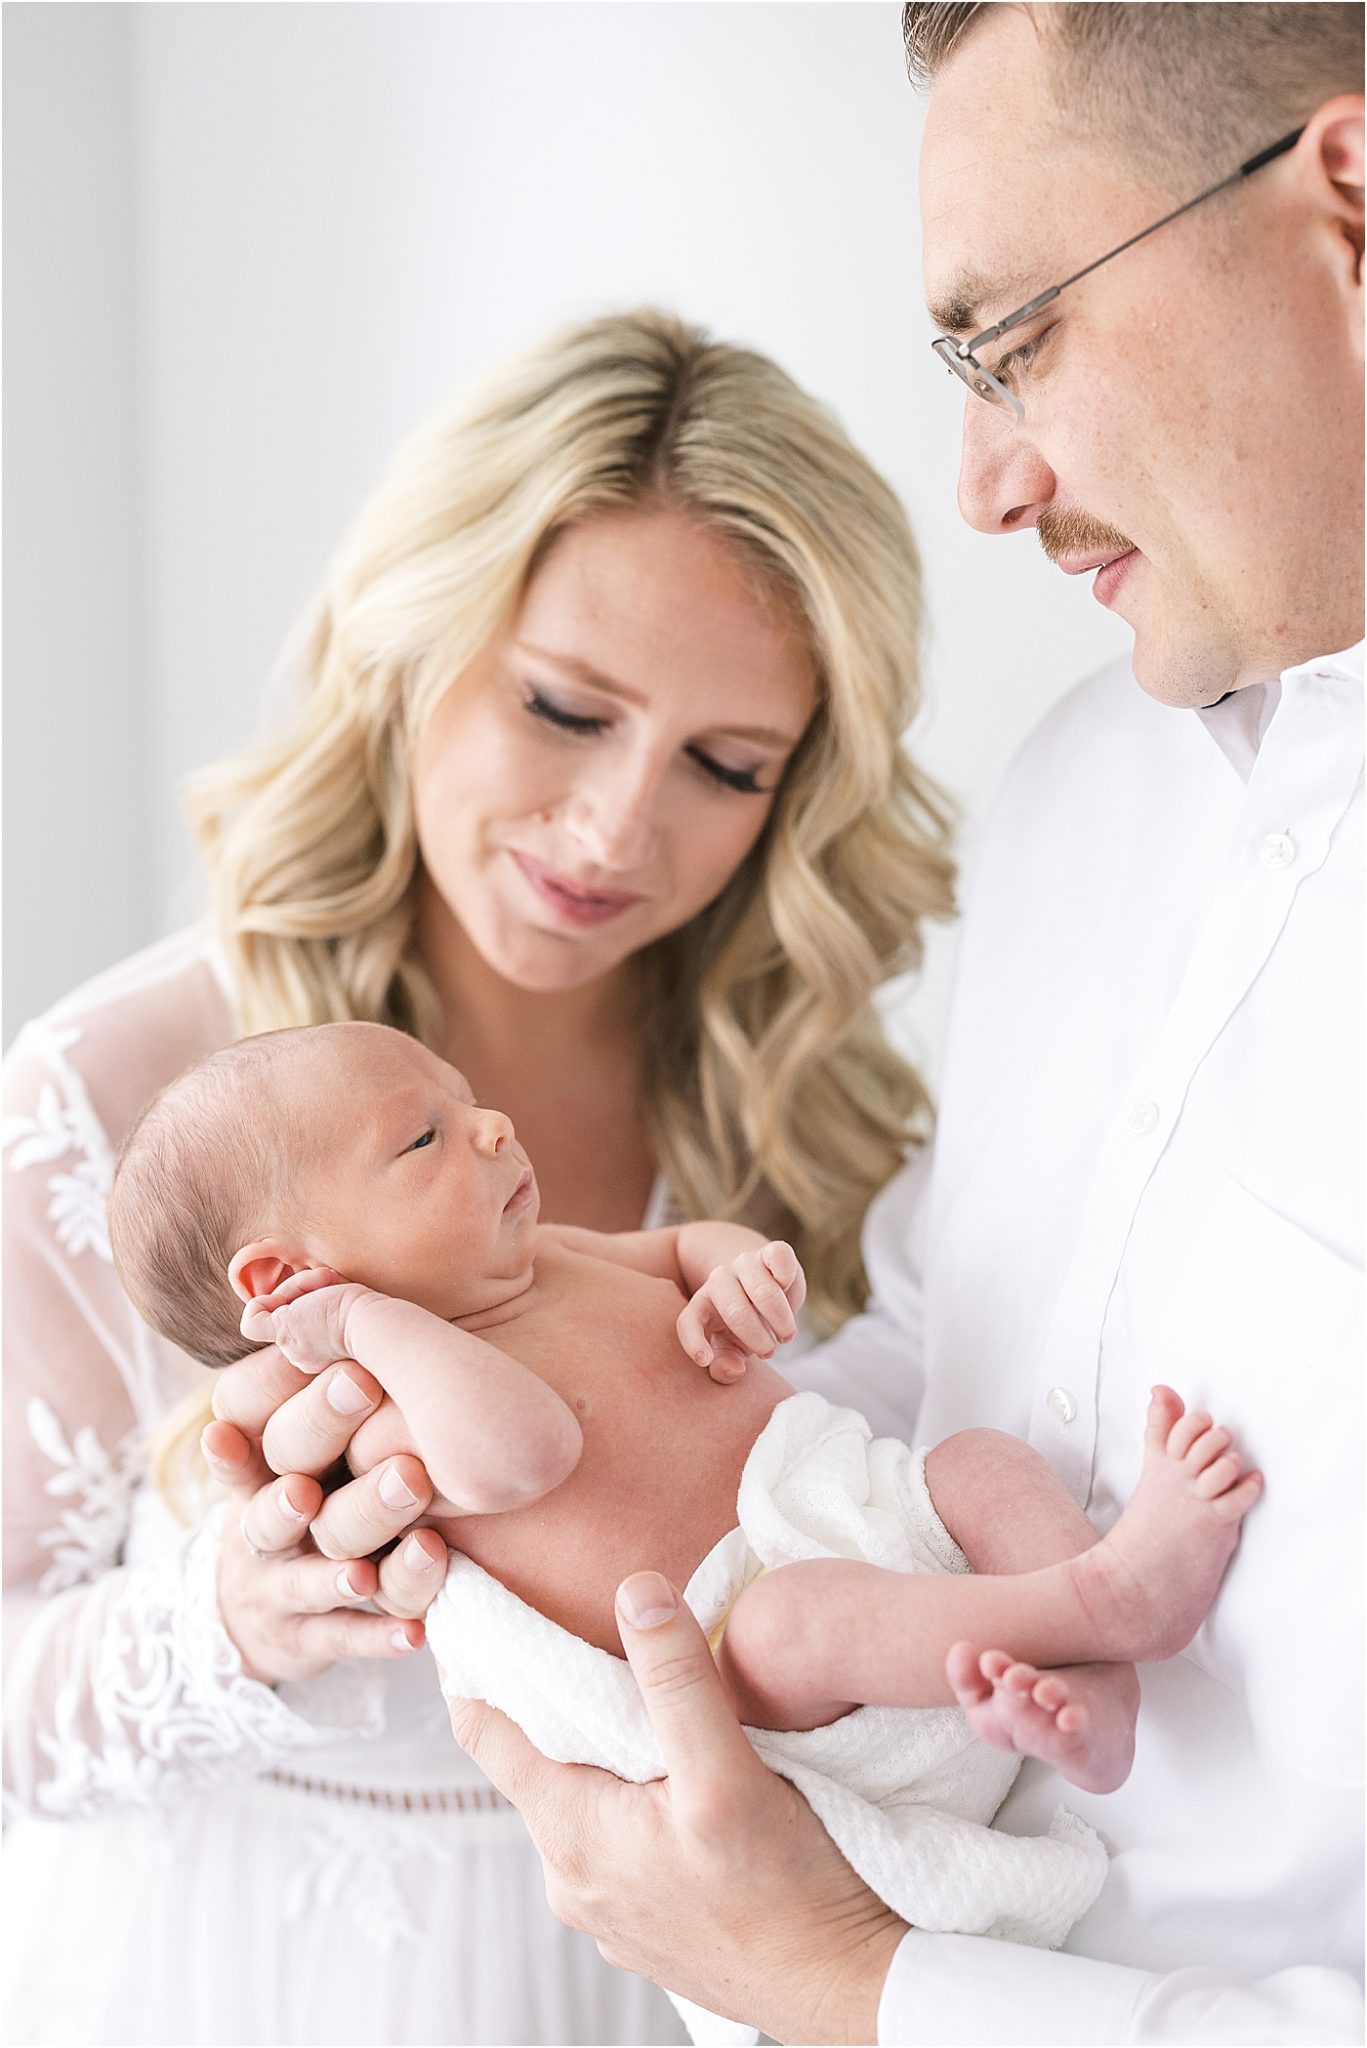 Newborn session with new parents and baby boy. Light and airy photos by Lindsay Konopa Photography.